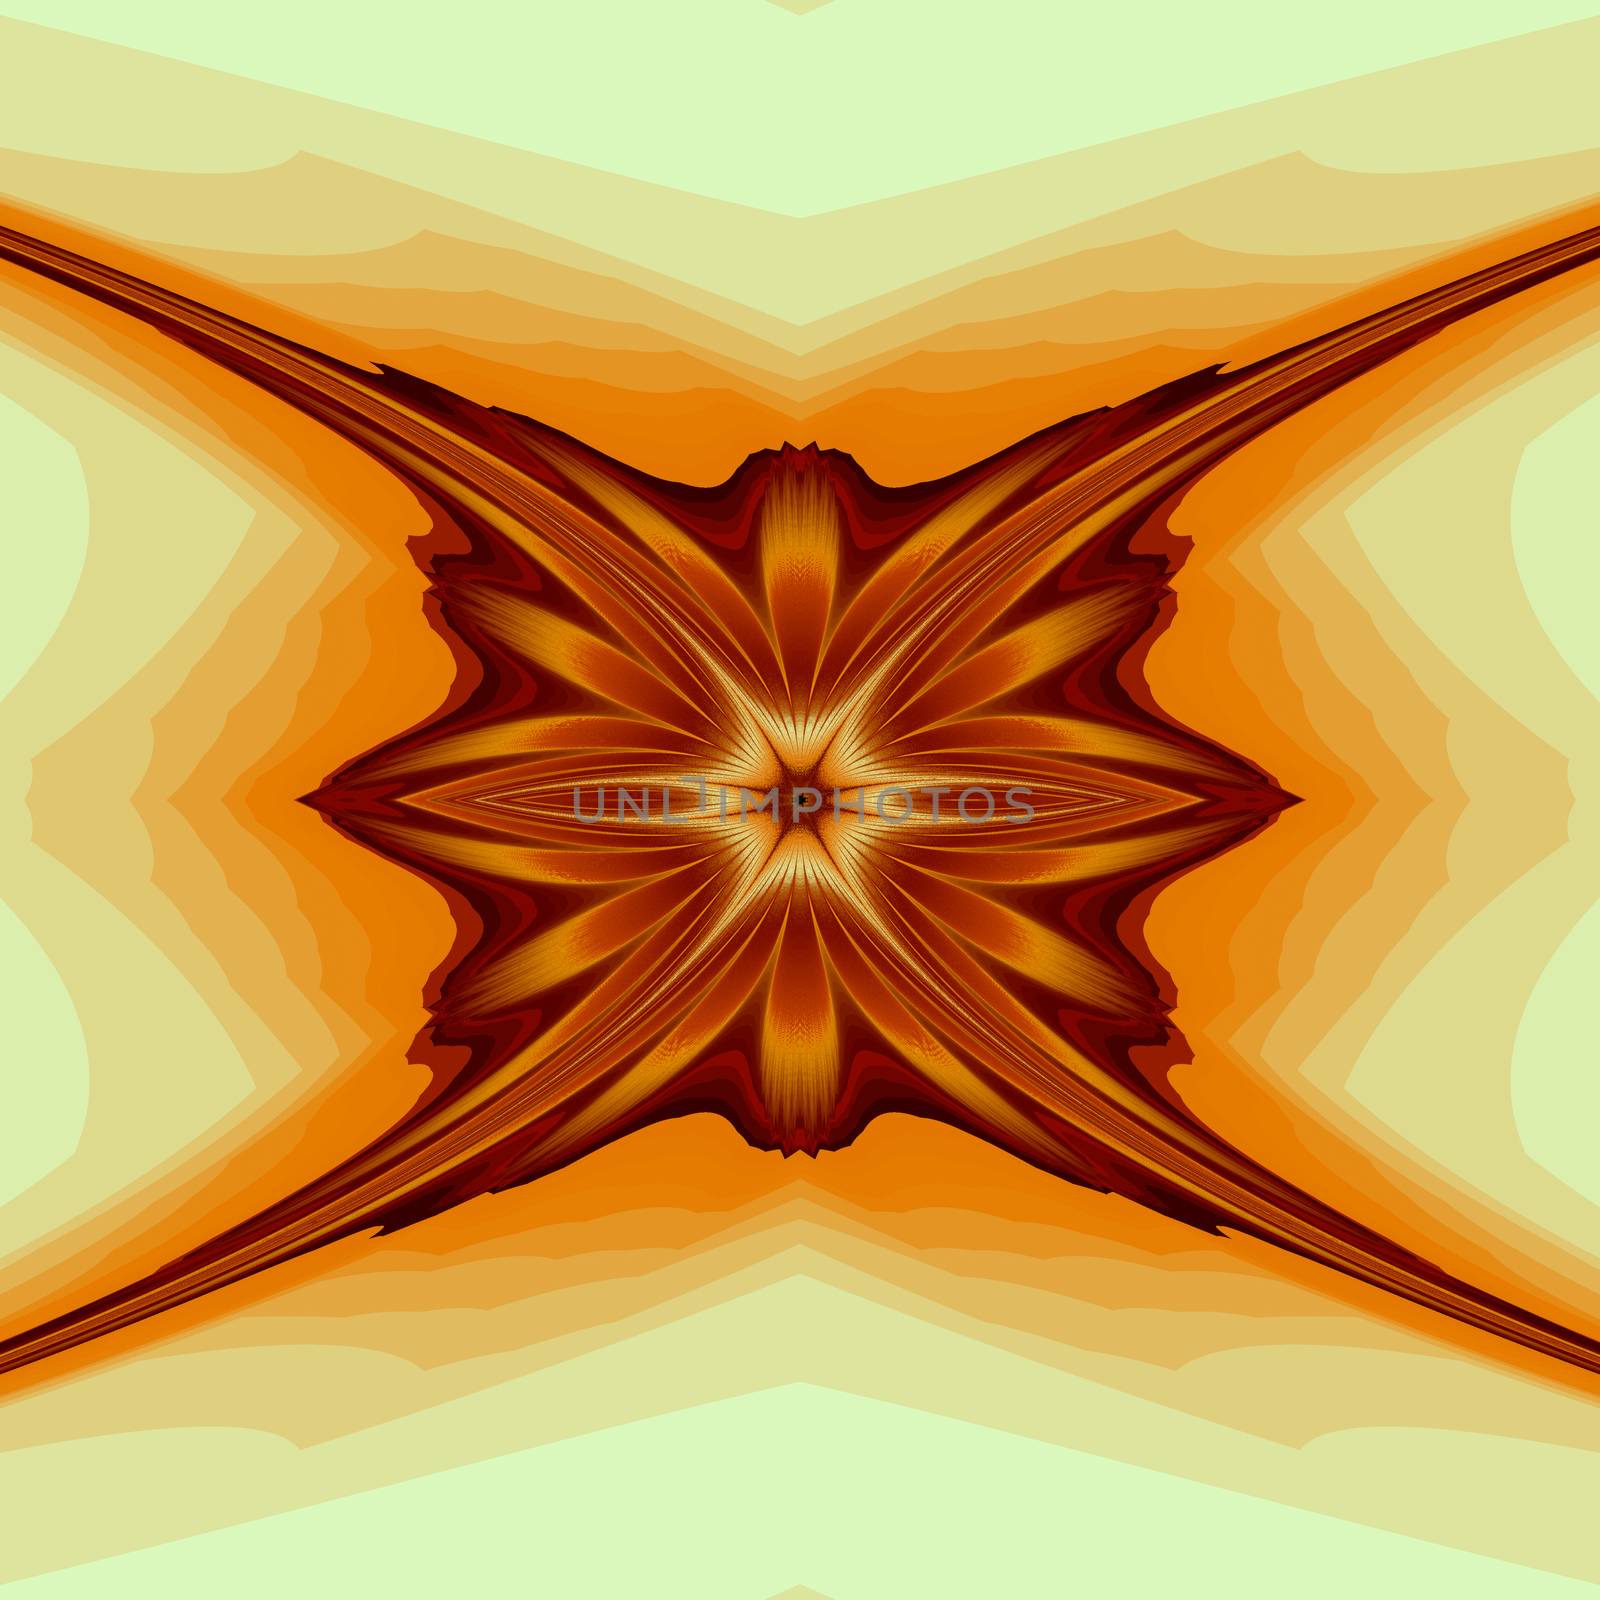 An abstract fractal design representing a desert flower in yellow and golden colors.